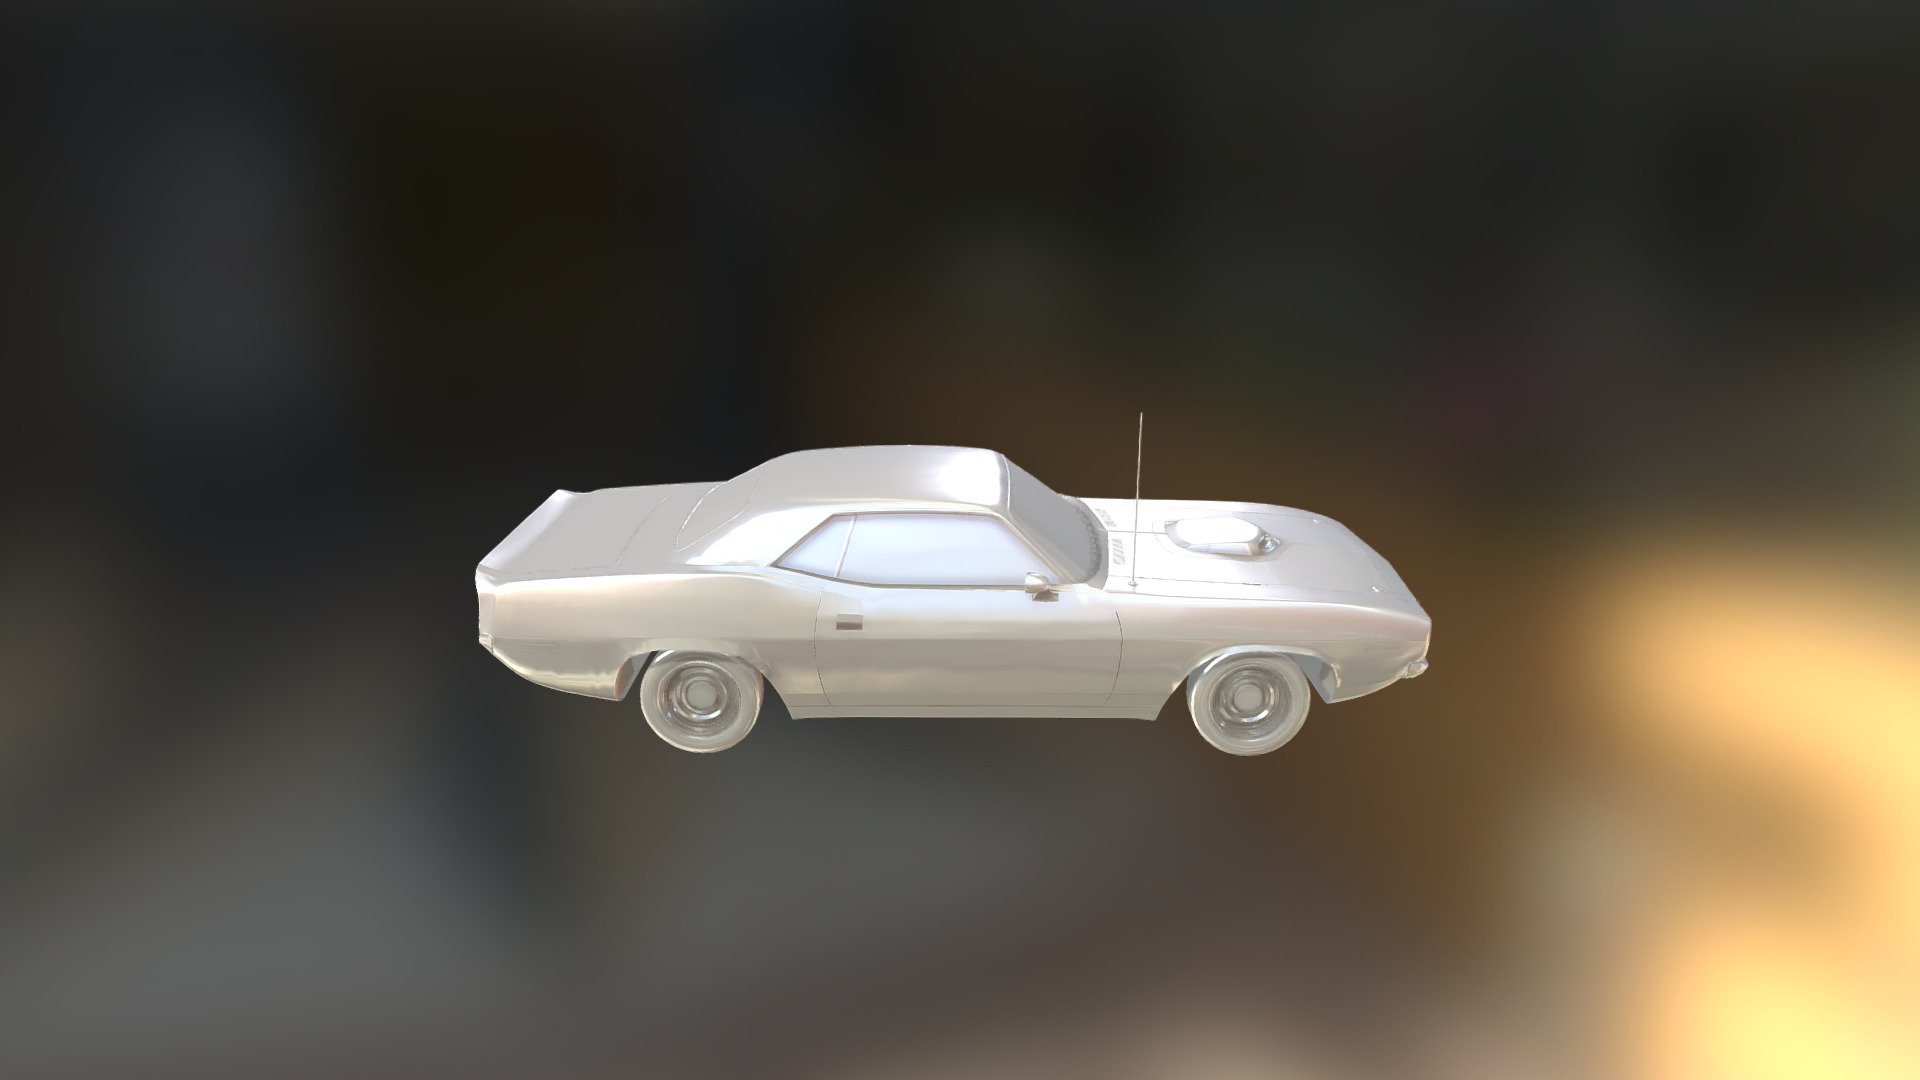 A 71' barracuda also done as practice. This Hard-Surface Hi poly model was done in Maya 3d model